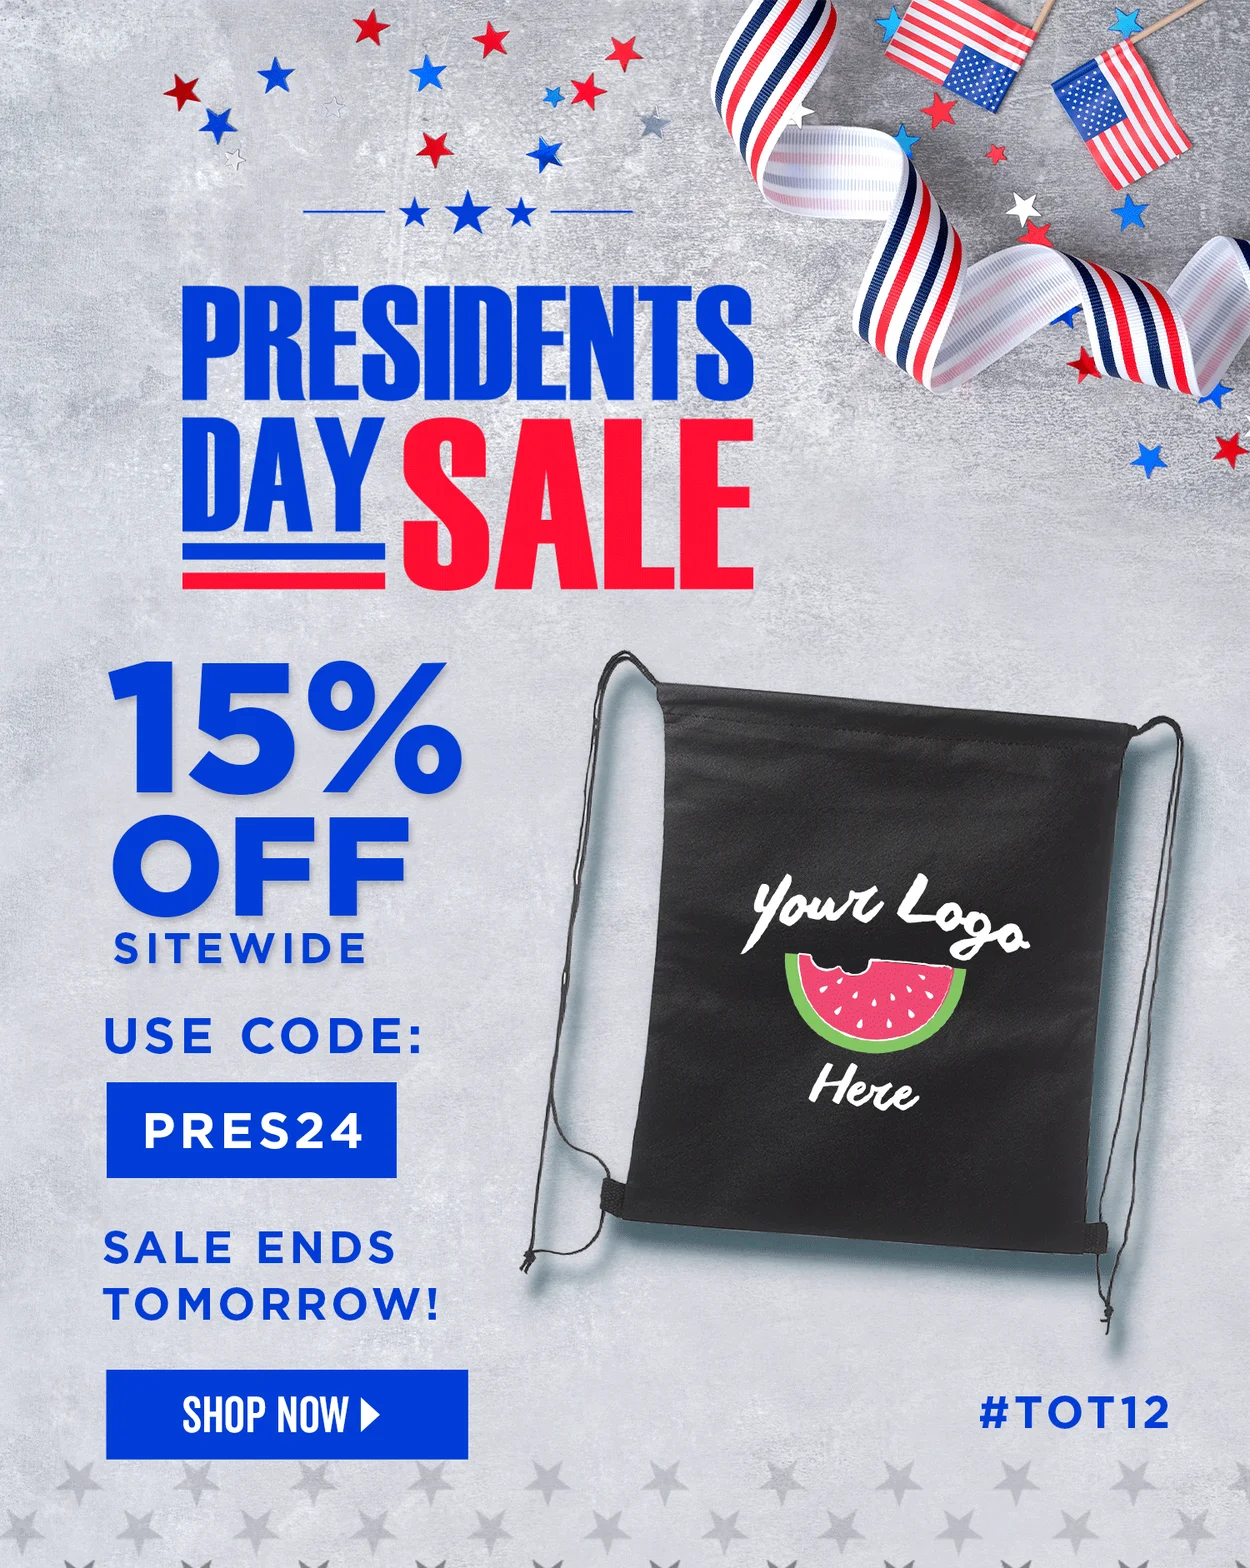 Presidents Day Sale | 15% Off Sitewide | Use Code: PRES24 | Sale Ends Tomorrow | Shop Now